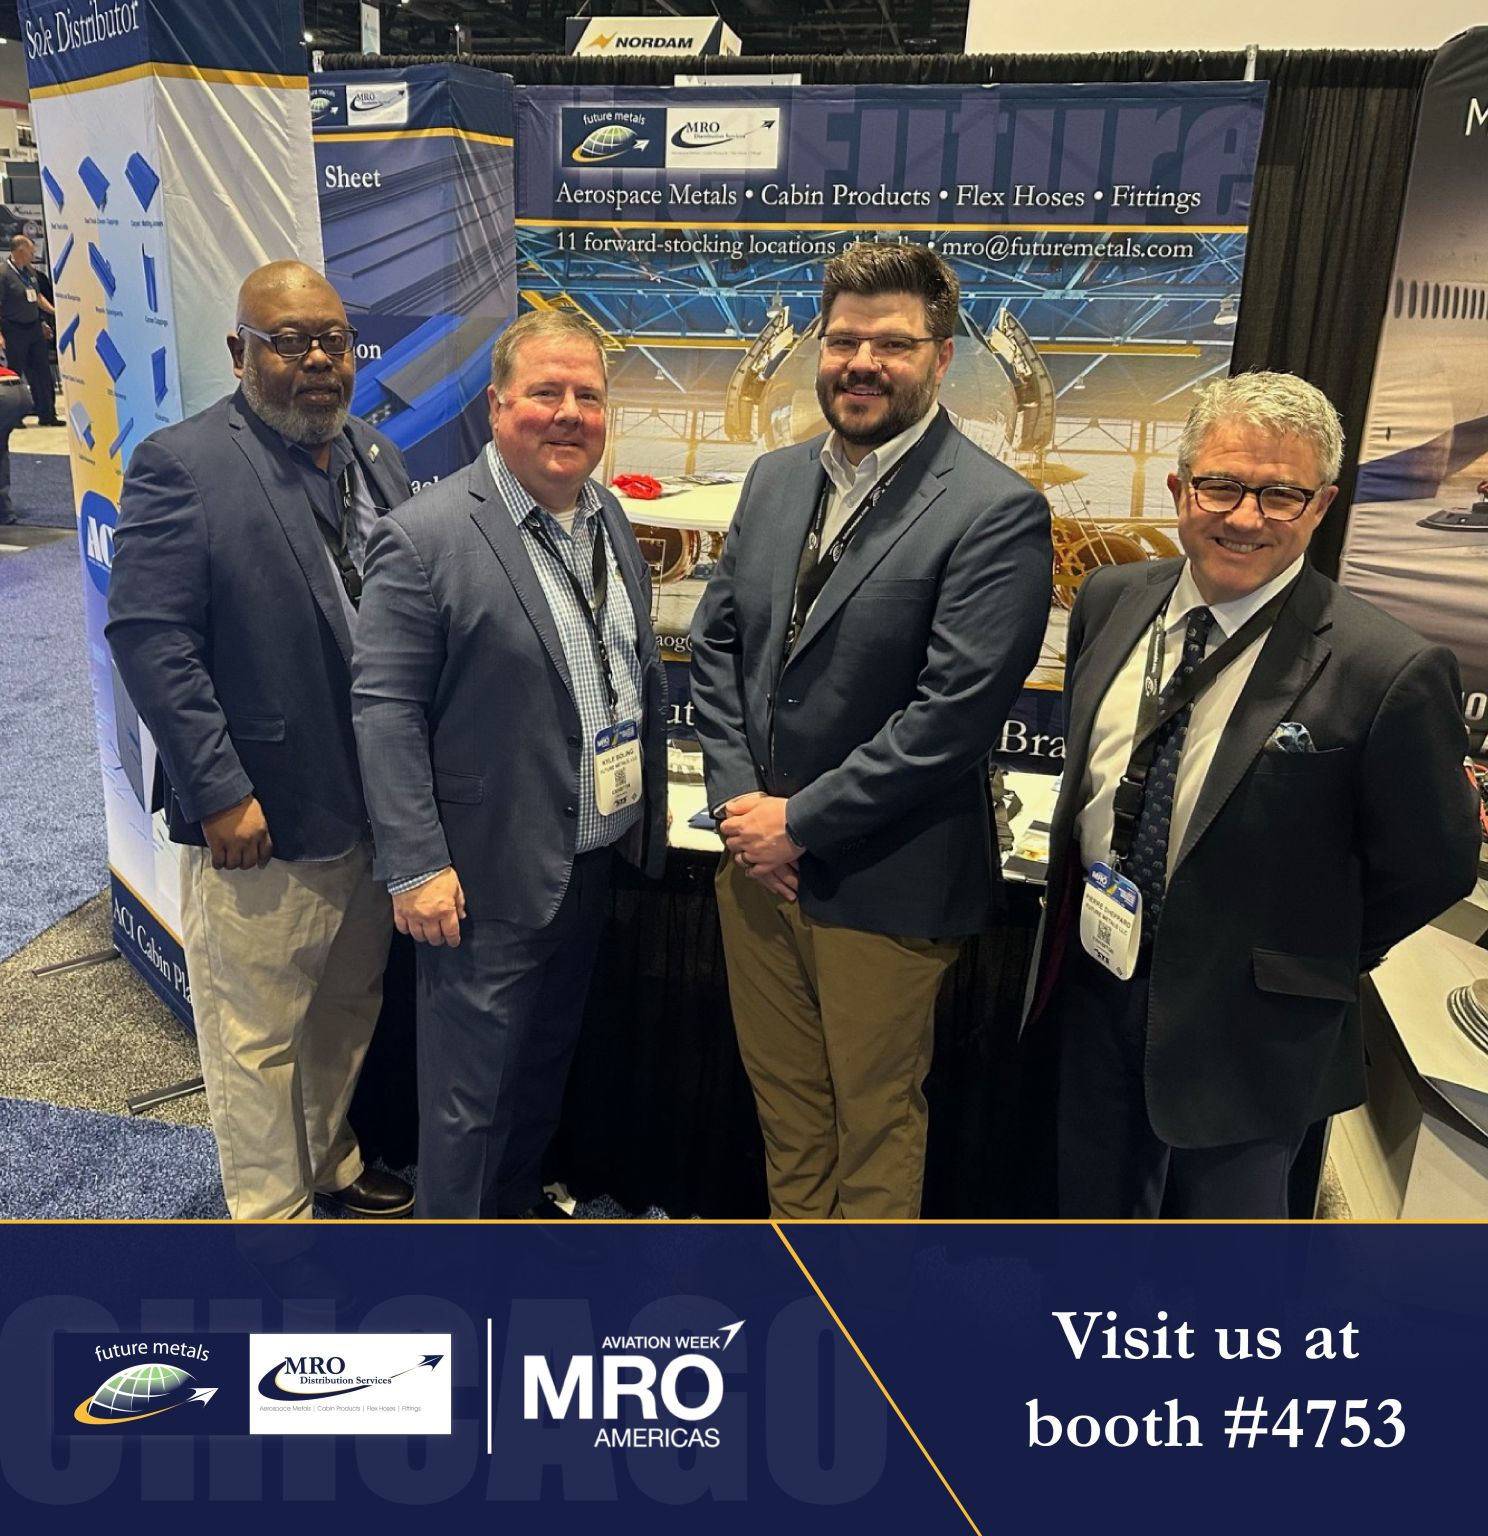 Extrusions, aircraft, aerospace, metal supplier, metals Four men showcase Future Metals’ aerospace-grade Aluminum 7075 alloy at a trade show, complete with specifications and compliance details.